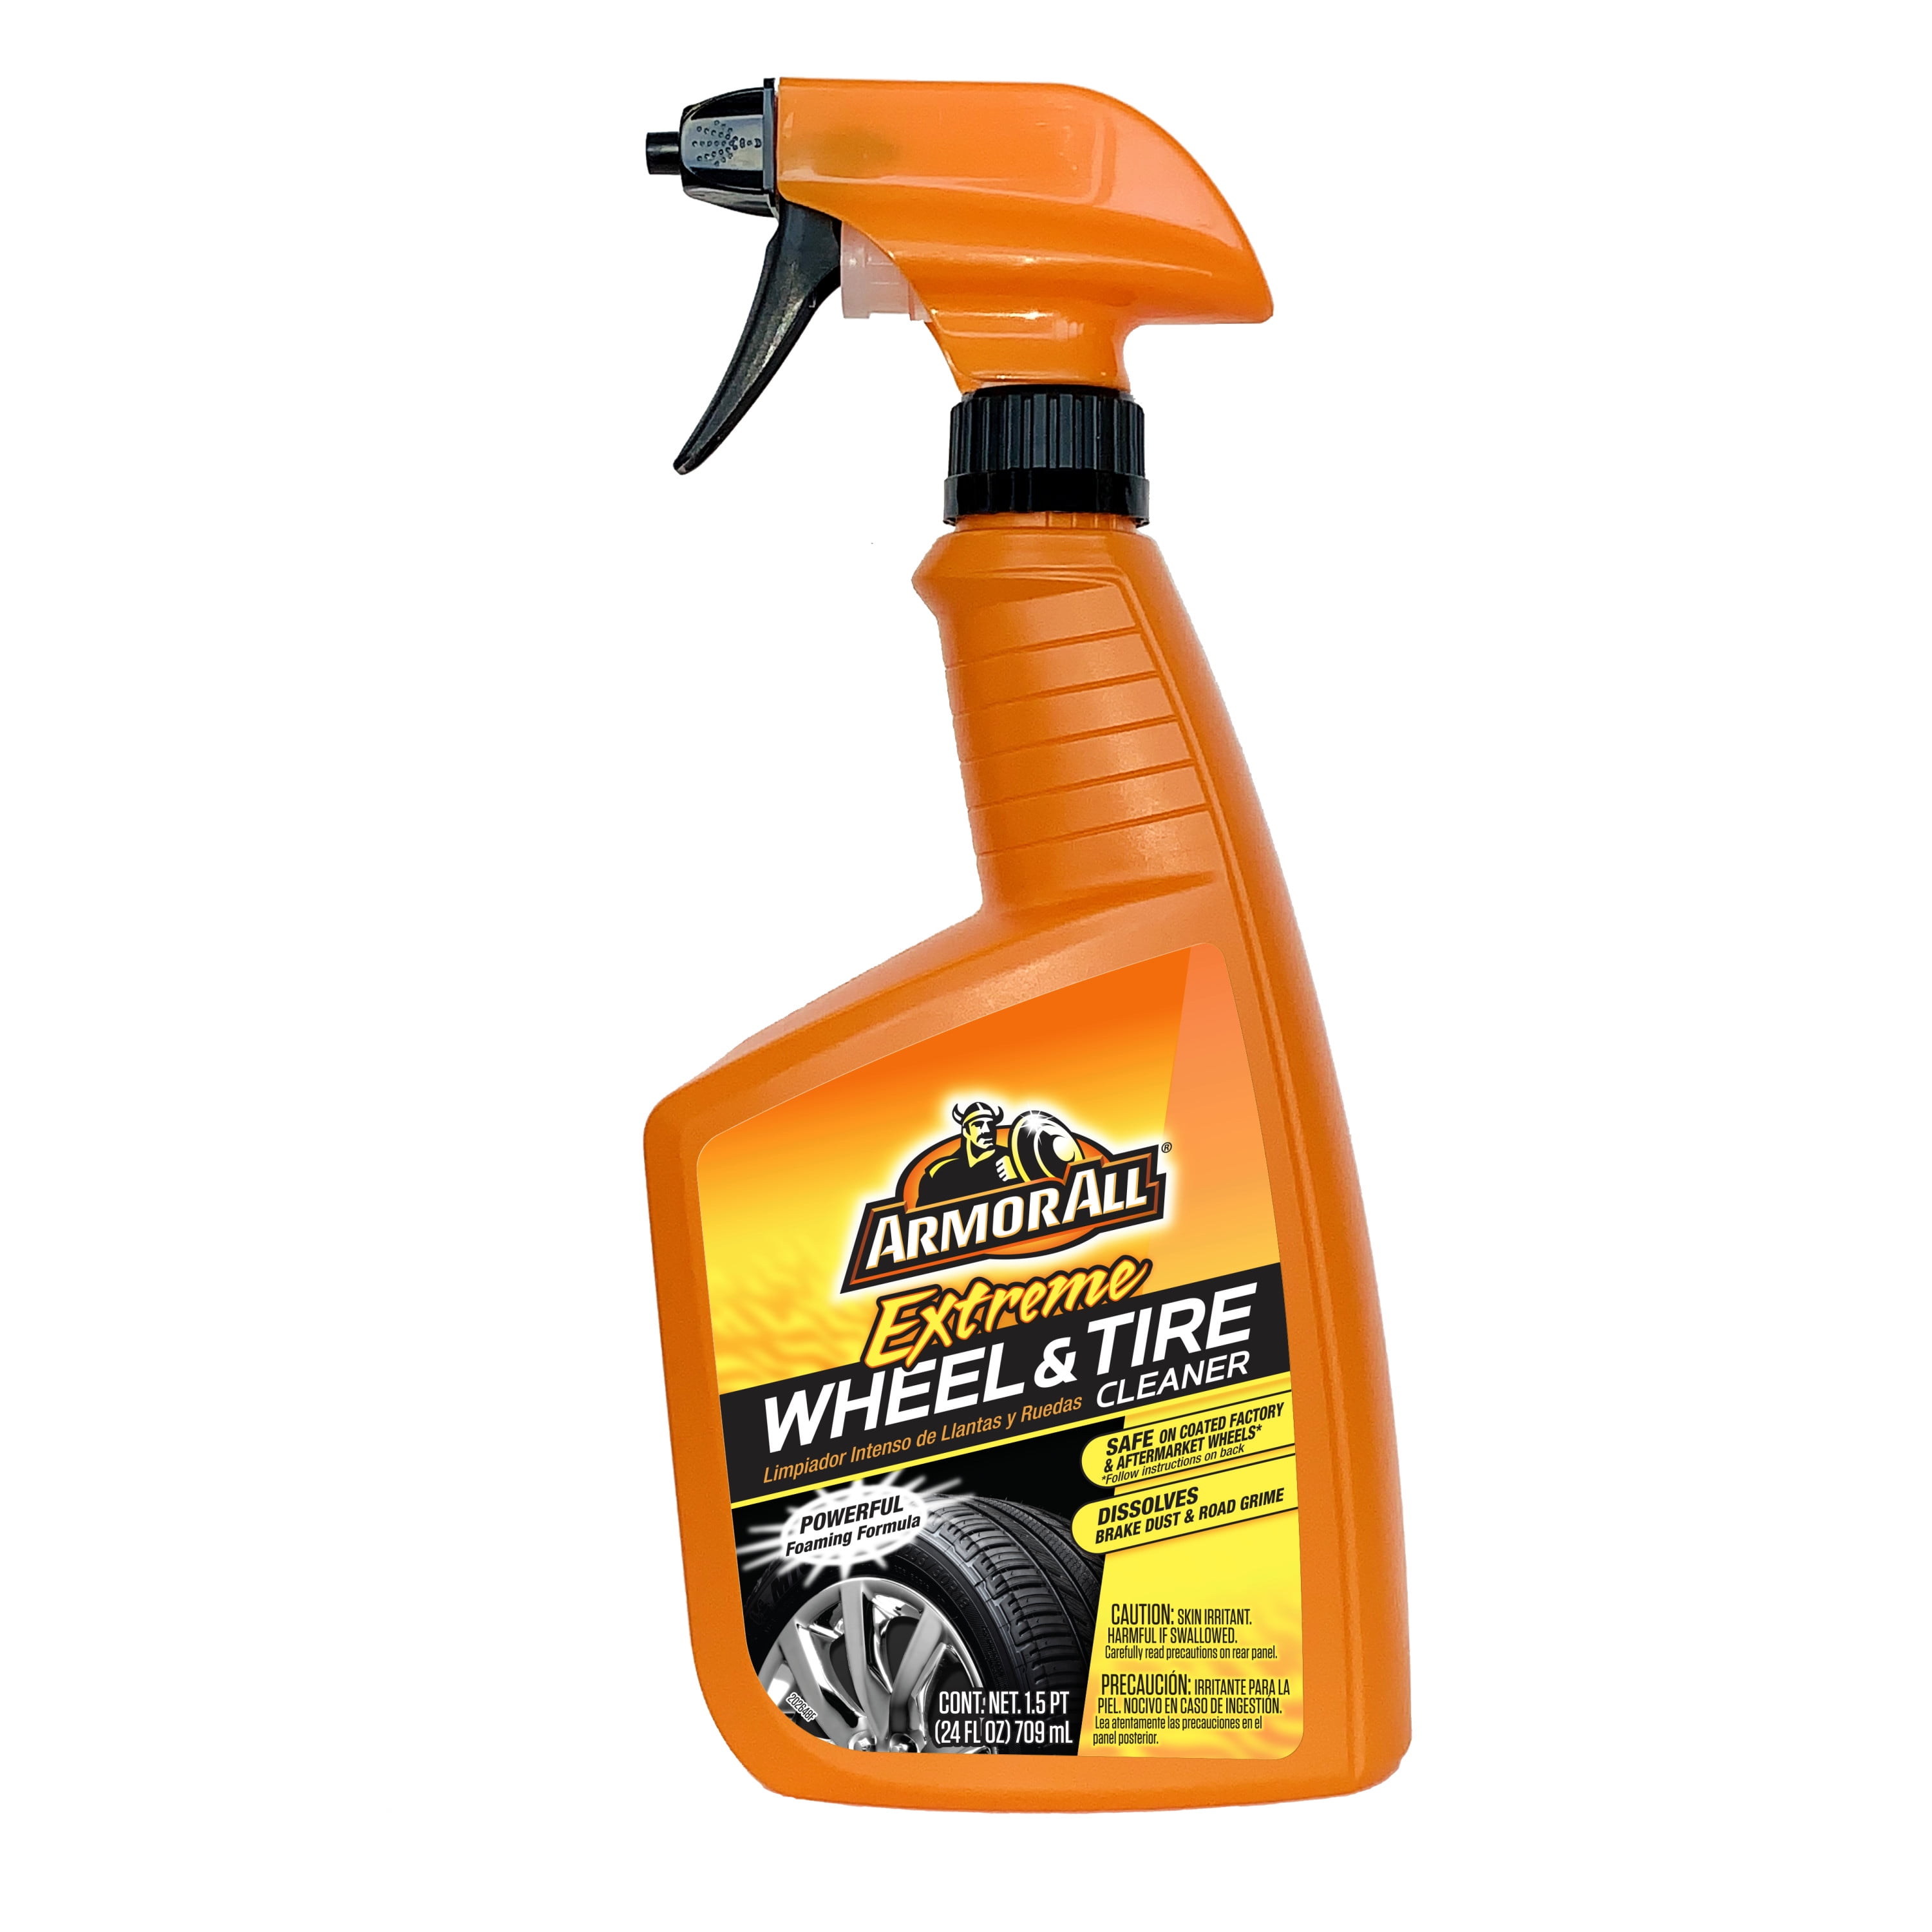 Armor All Extreme Wheel & Tire Cleaner - 14416